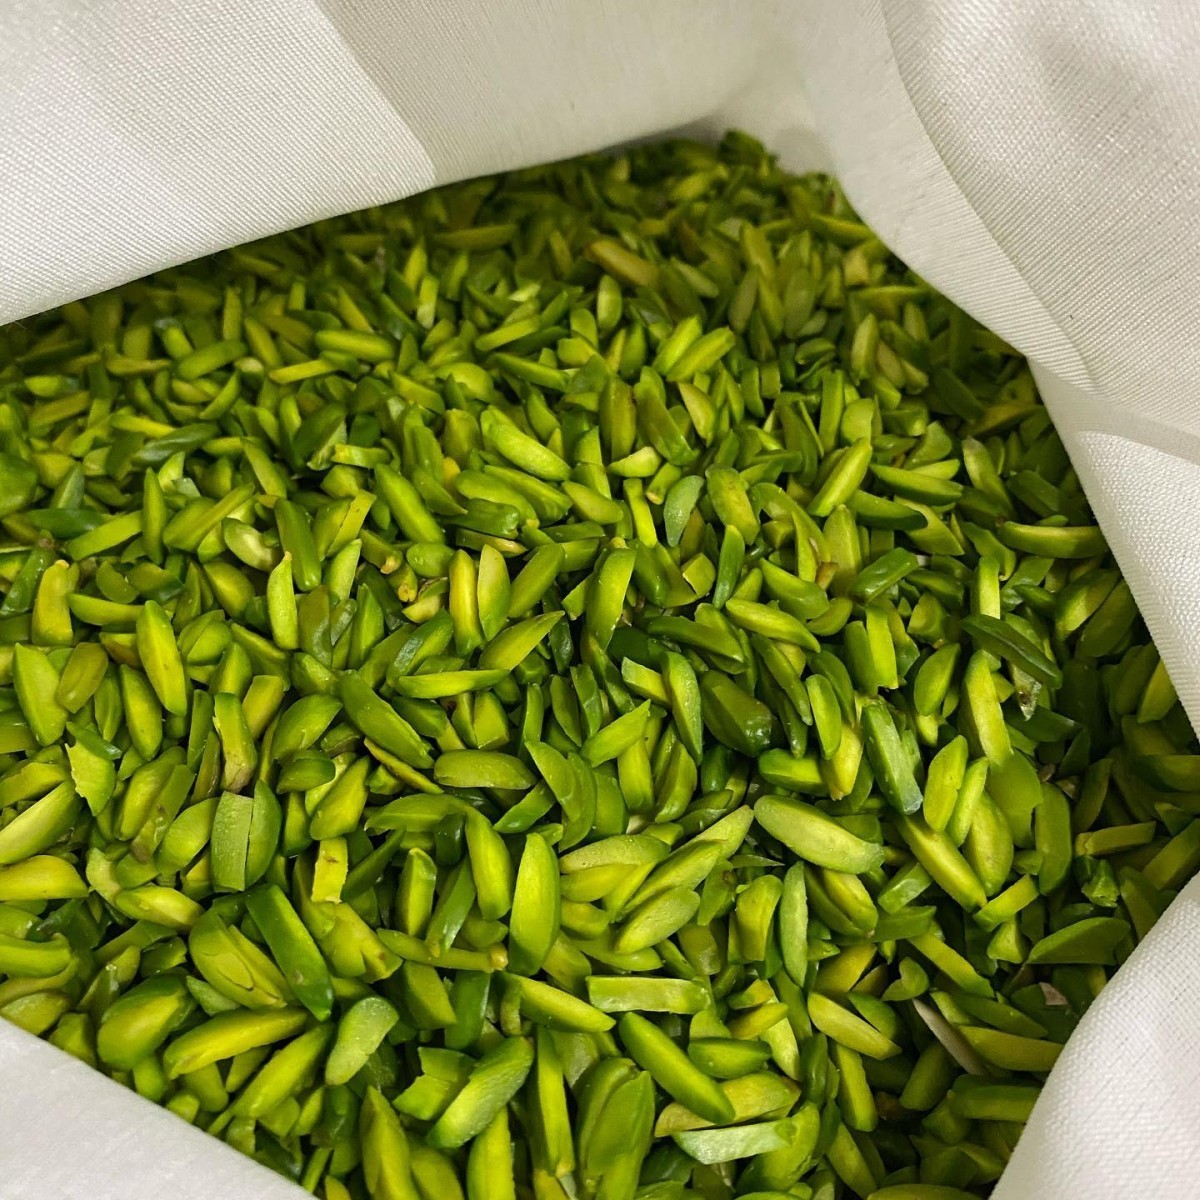 Export of cheap green pistachio slices to Russia